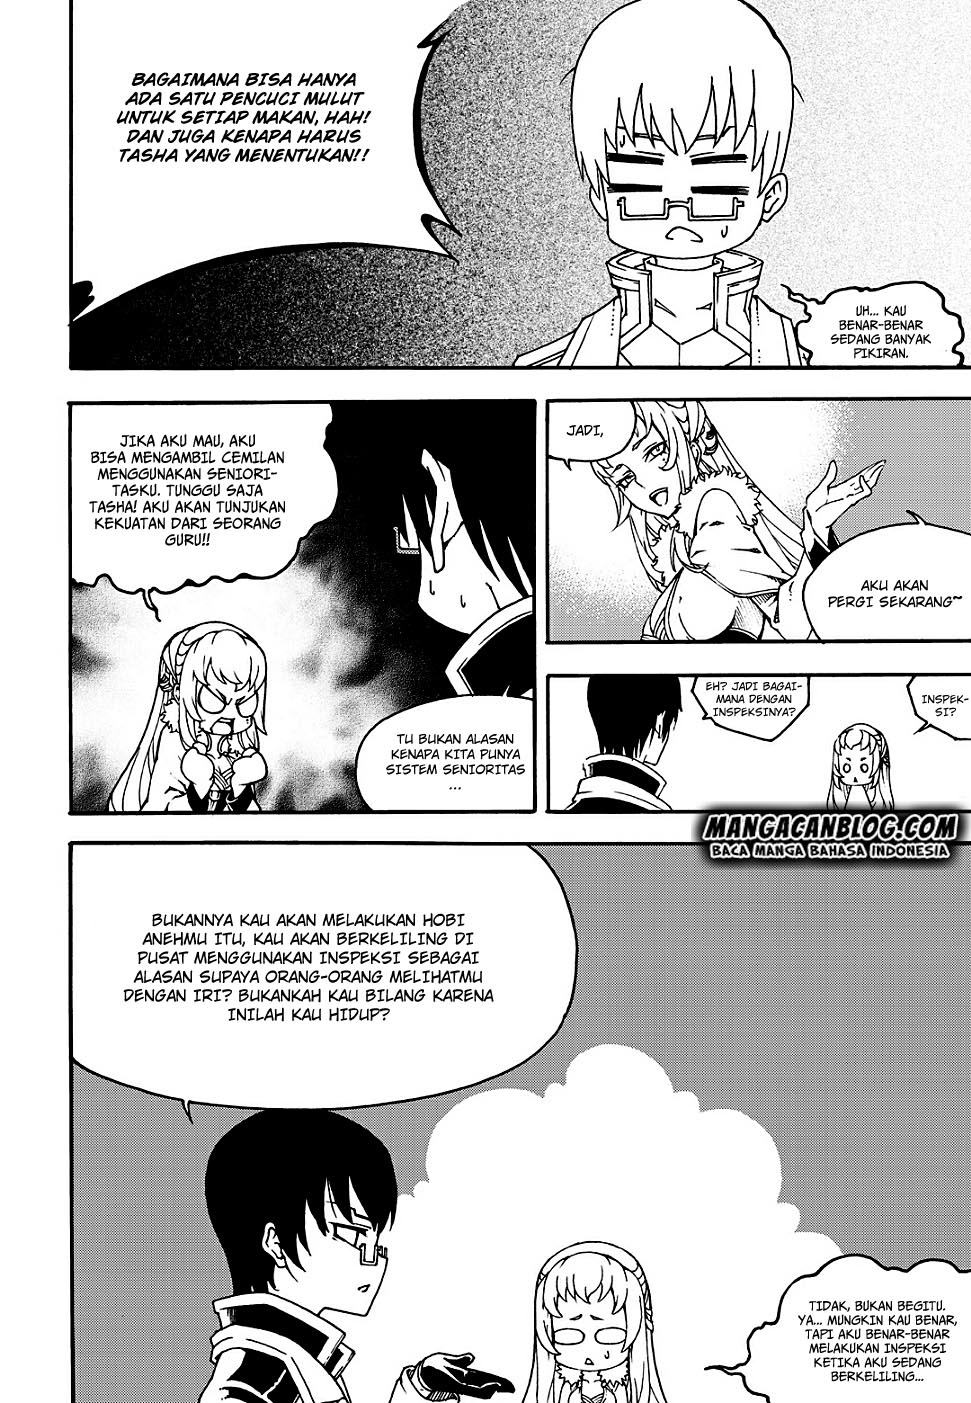 Witch Hunter Chapter 153